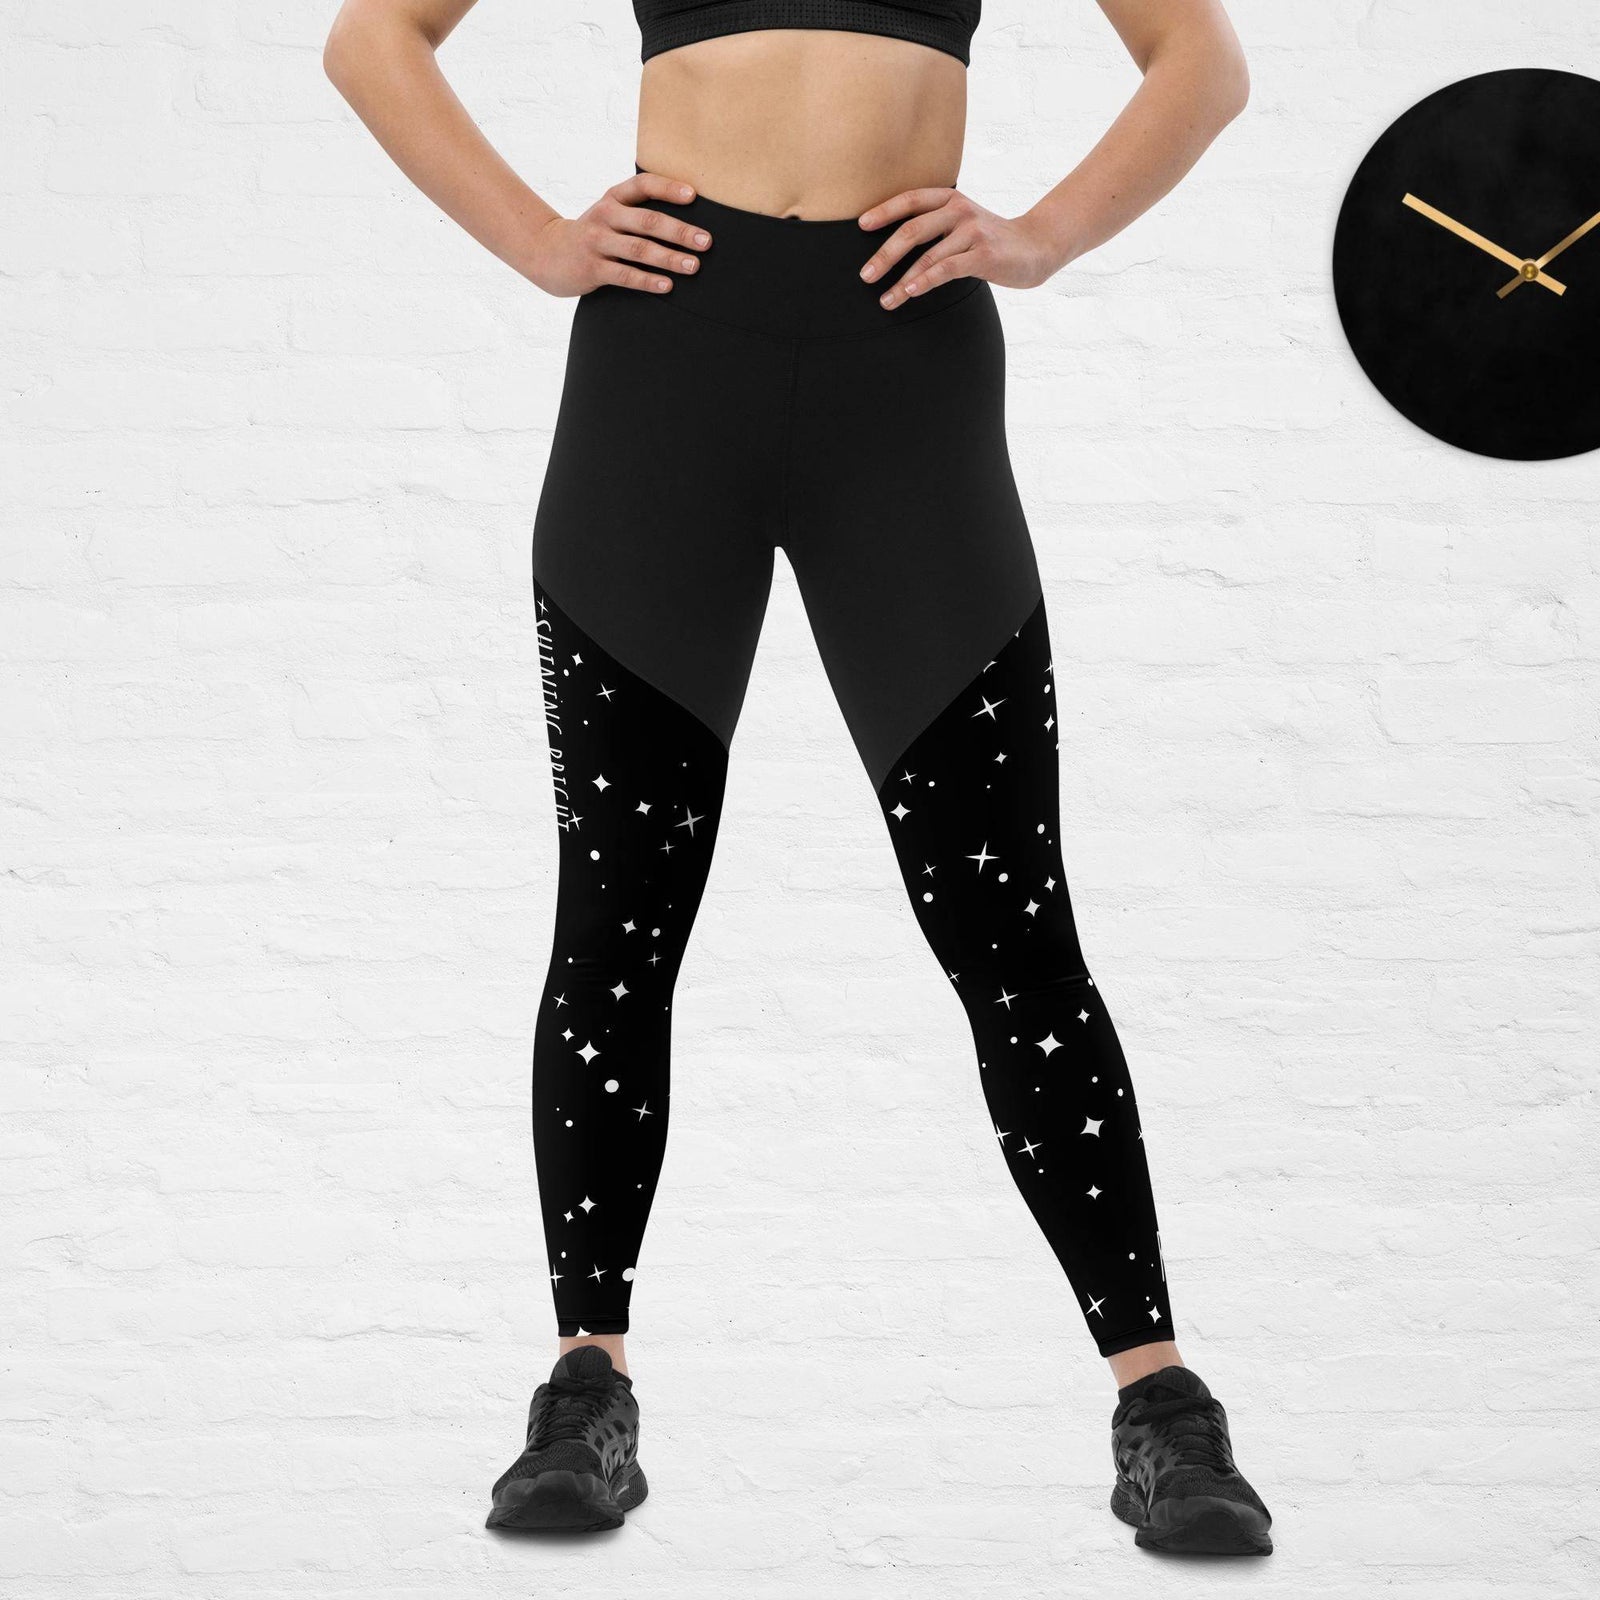 Seamless Womens Gym Set Fitness Leggings And Bubblelime Yoga Pants With  Long Sleeves For Sport And Gym Workouts From Qqly, $16.6 | DHgate.Com